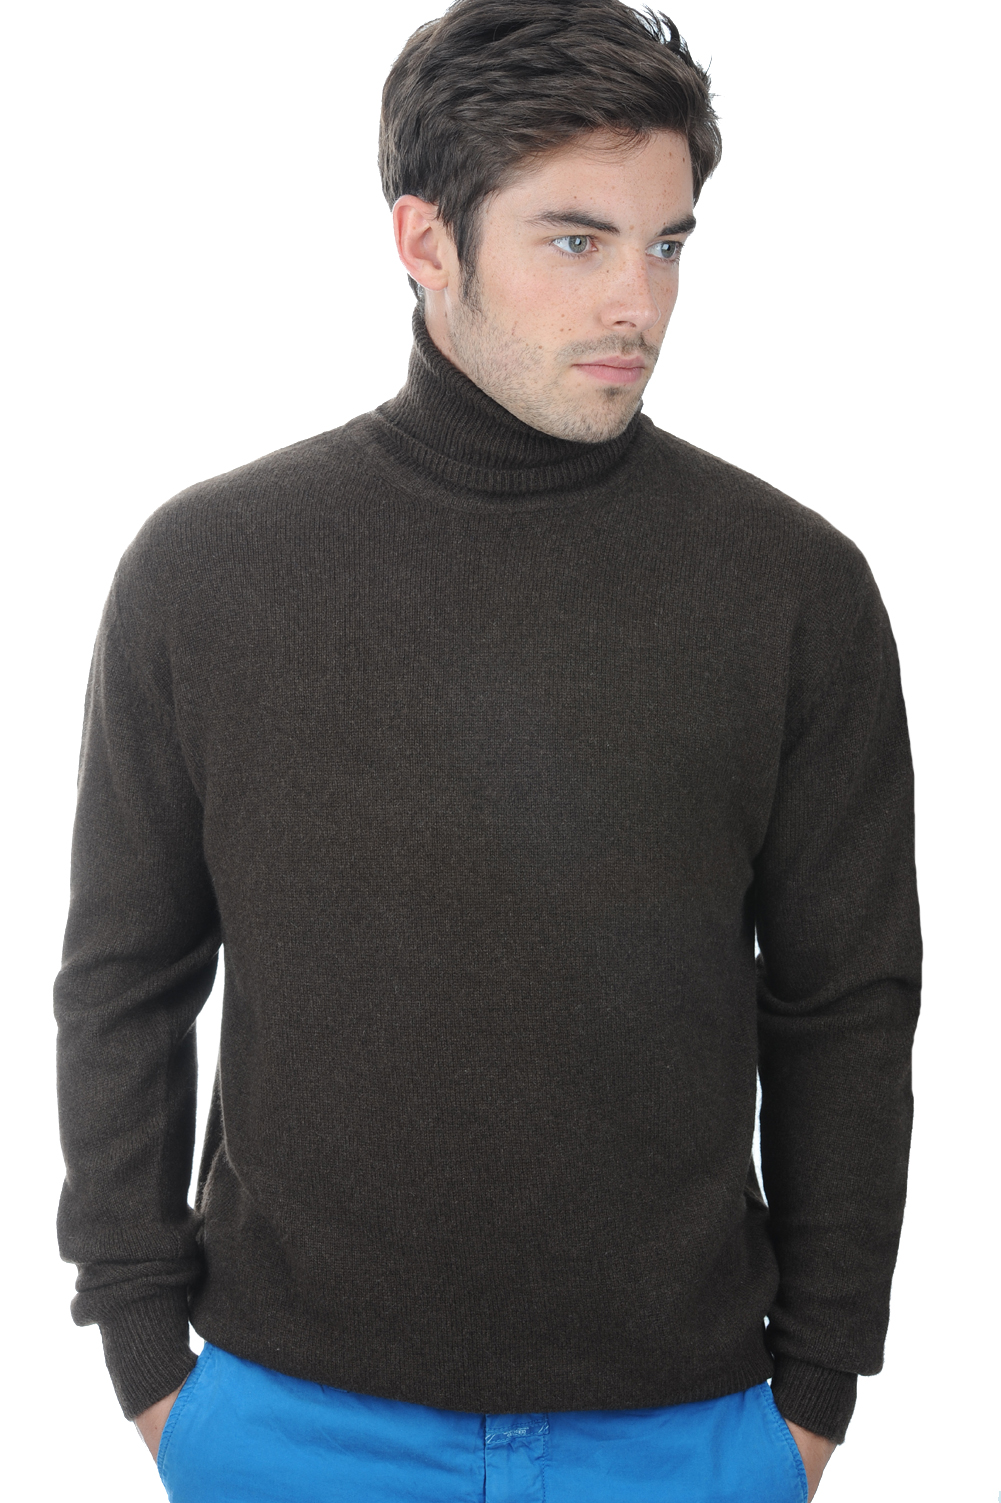 Yak pull homme col roule yakedgar marron naturel 3xl